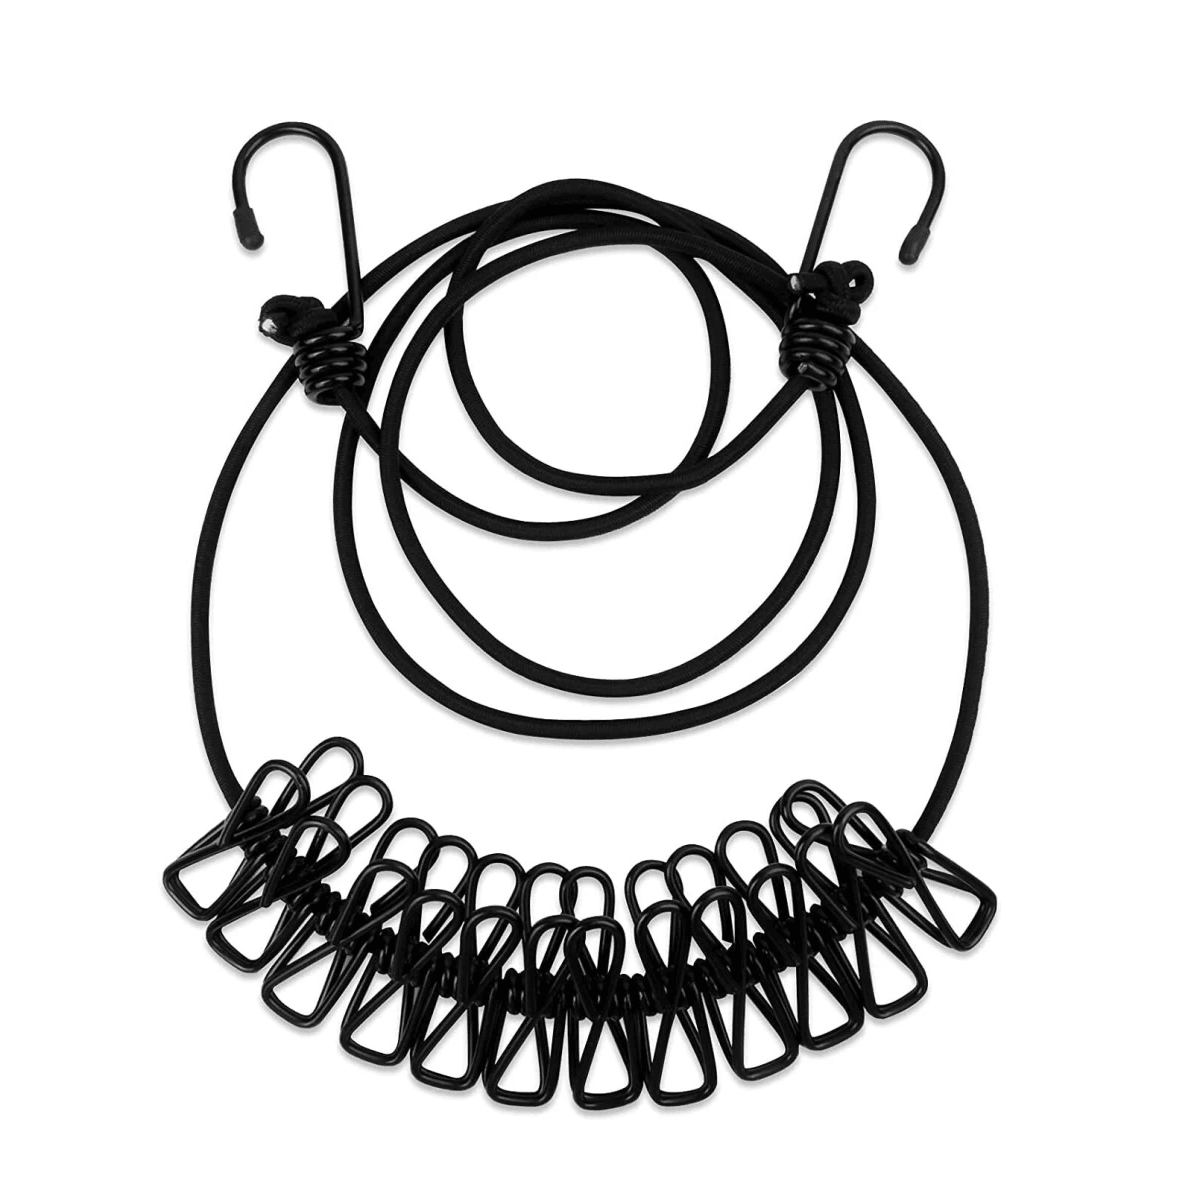 Hybrica GO-ON Travel Clothesline rope with clips